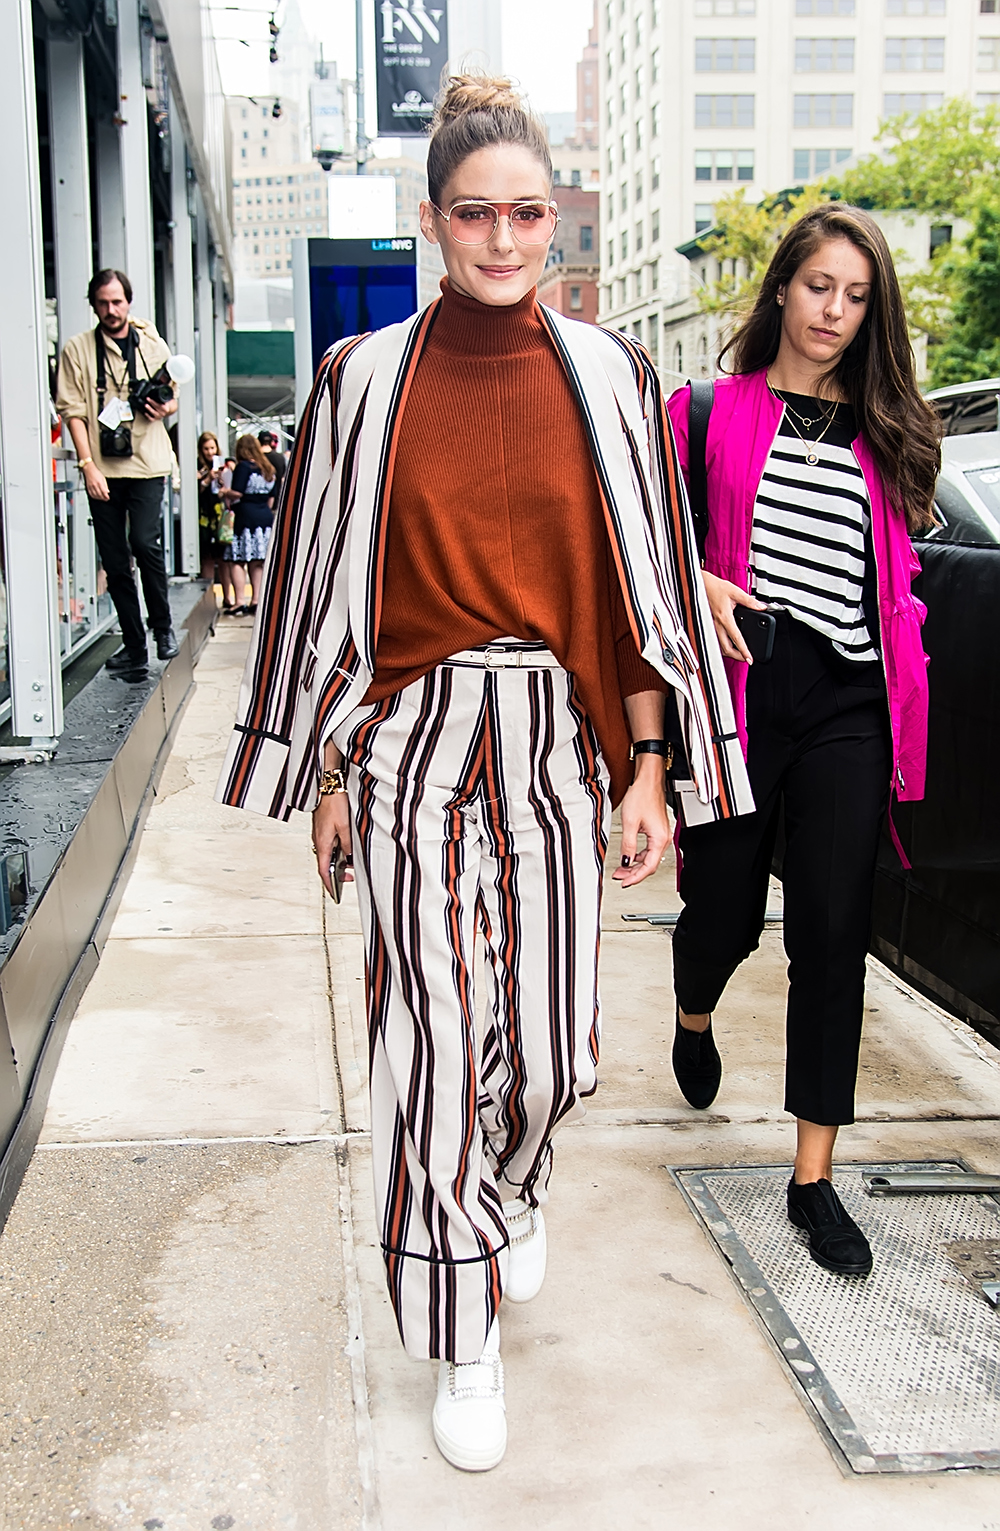 NEW YORK, NY - SEPTEMBER 11: Olivia Palermo is seen leaving the Sally LaPointe SS19 fashion show during New York Fashion Week at Gallery I at Spring Studios on September 11, 2018 in New York City. (Photo by Gilbert Carrasquillo/GC Images)